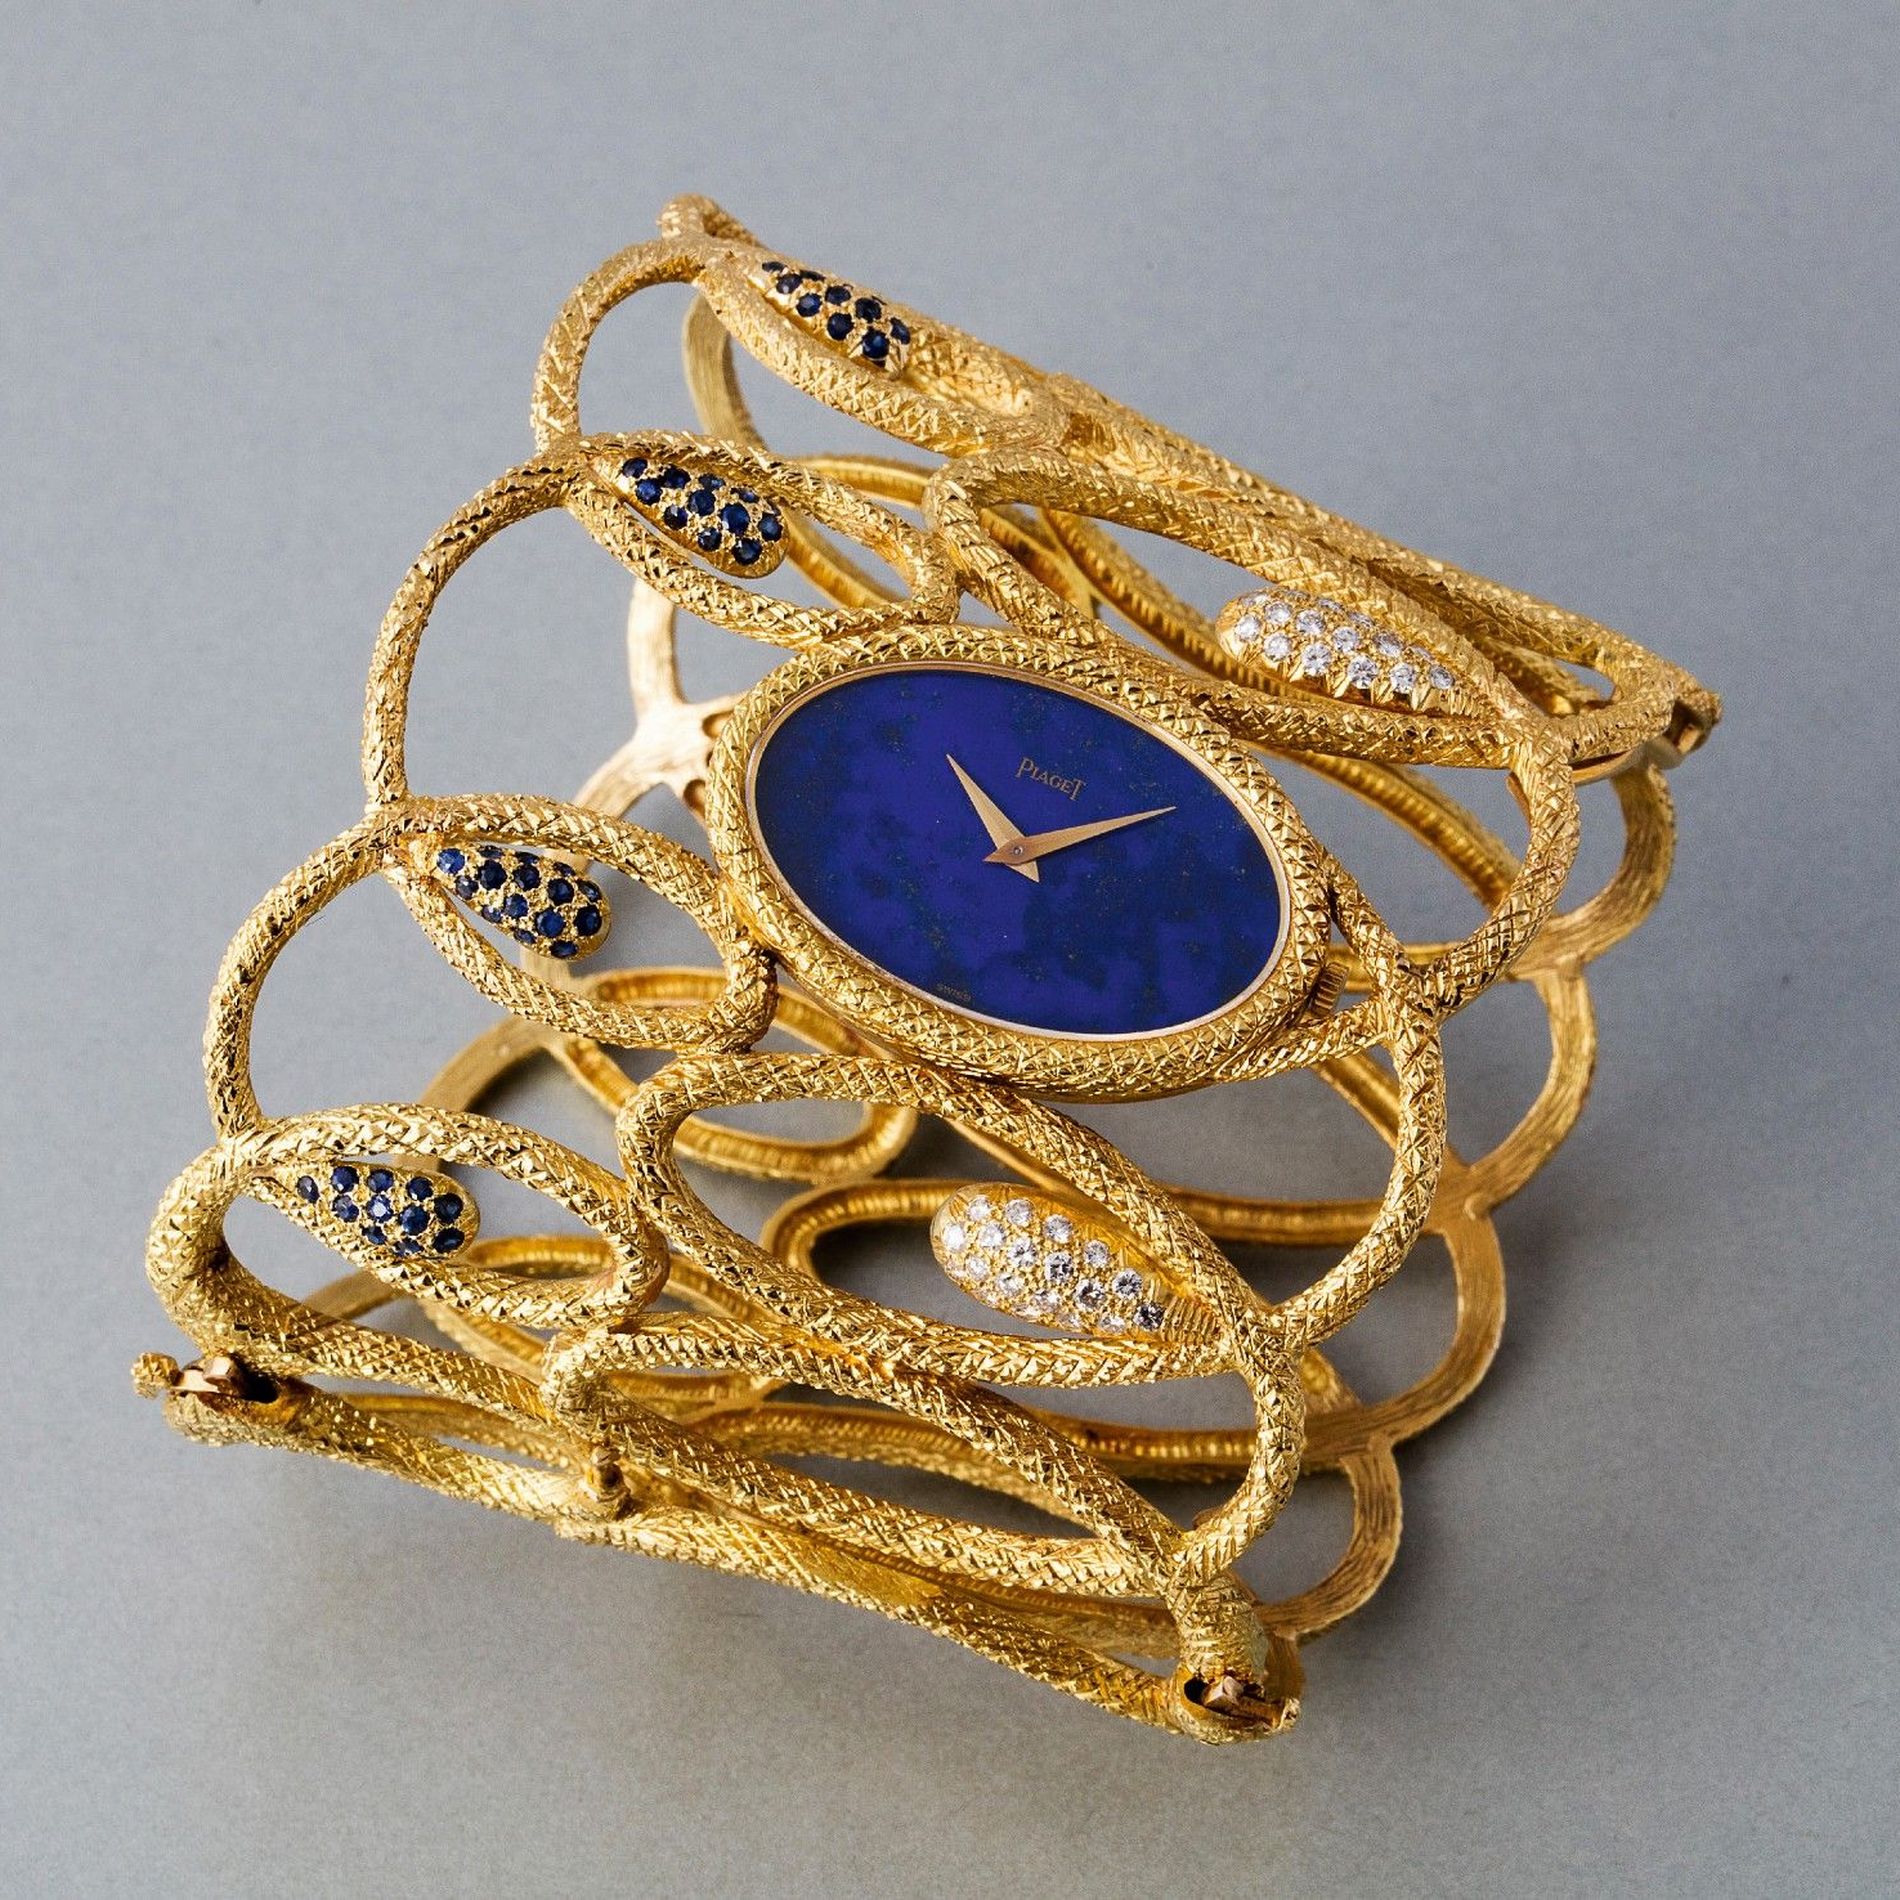 Piaget  Ref. 9550D571  A highly exclusive and sumptuous yellow gold bangle watch with lapis lazuli dial and set with sapphires and diamonds  1971  61mm. Width 210mm. Max length  Case, dial and movement signed  Estimate CHF30,000 - 50,000 